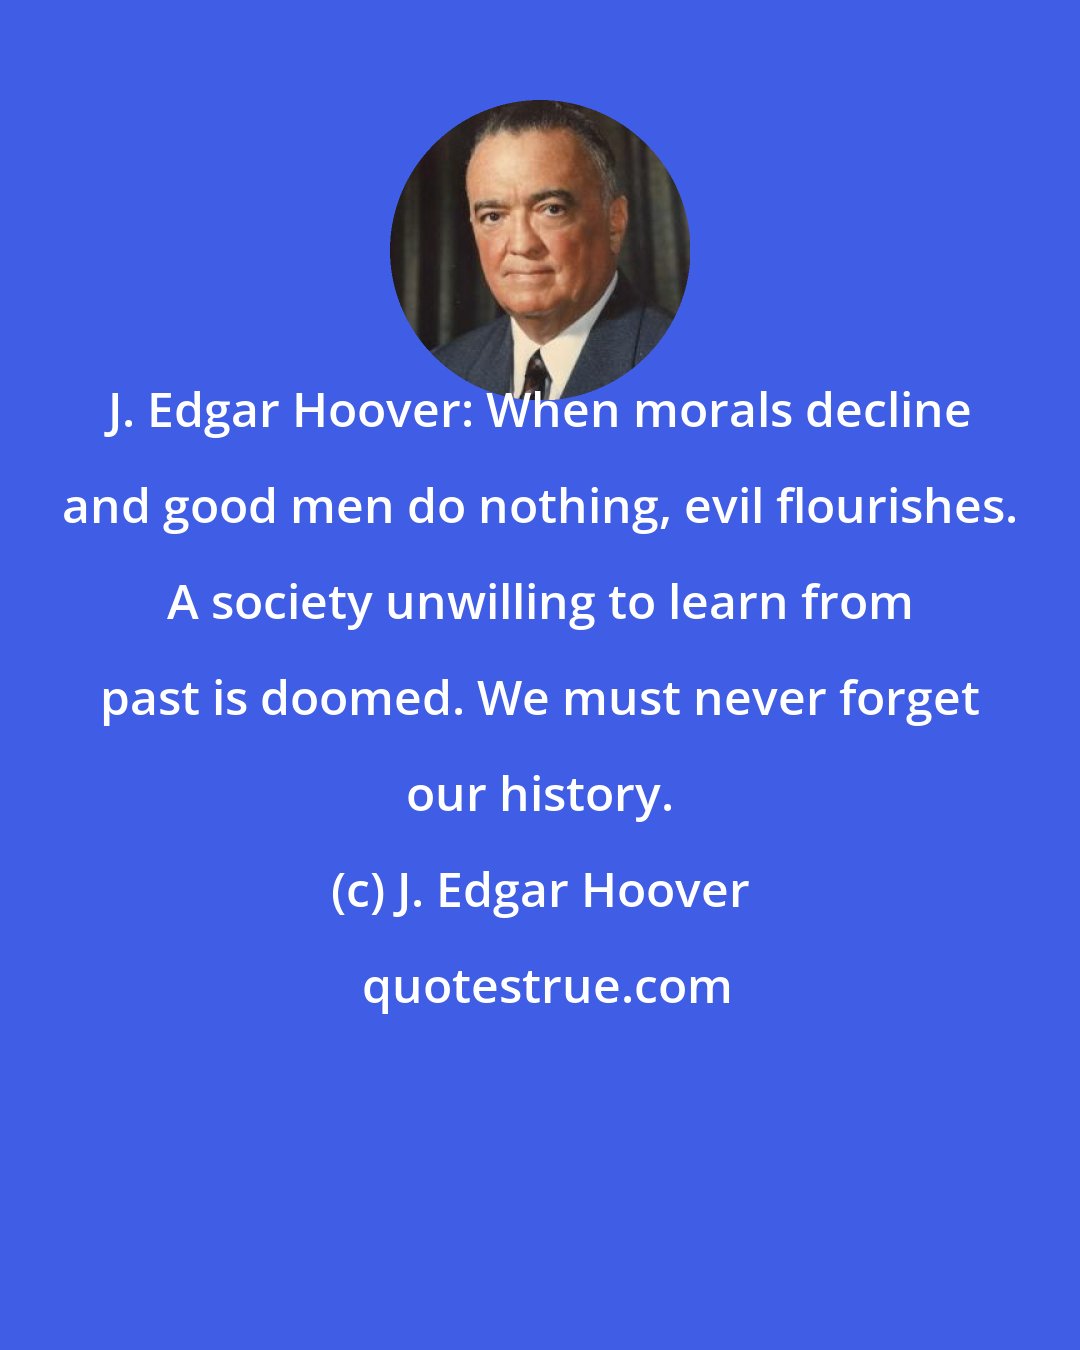 J. Edgar Hoover: J. Edgar Hoover: When morals decline and good men do nothing, evil flourishes. A society unwilling to learn from past is doomed. We must never forget our history.